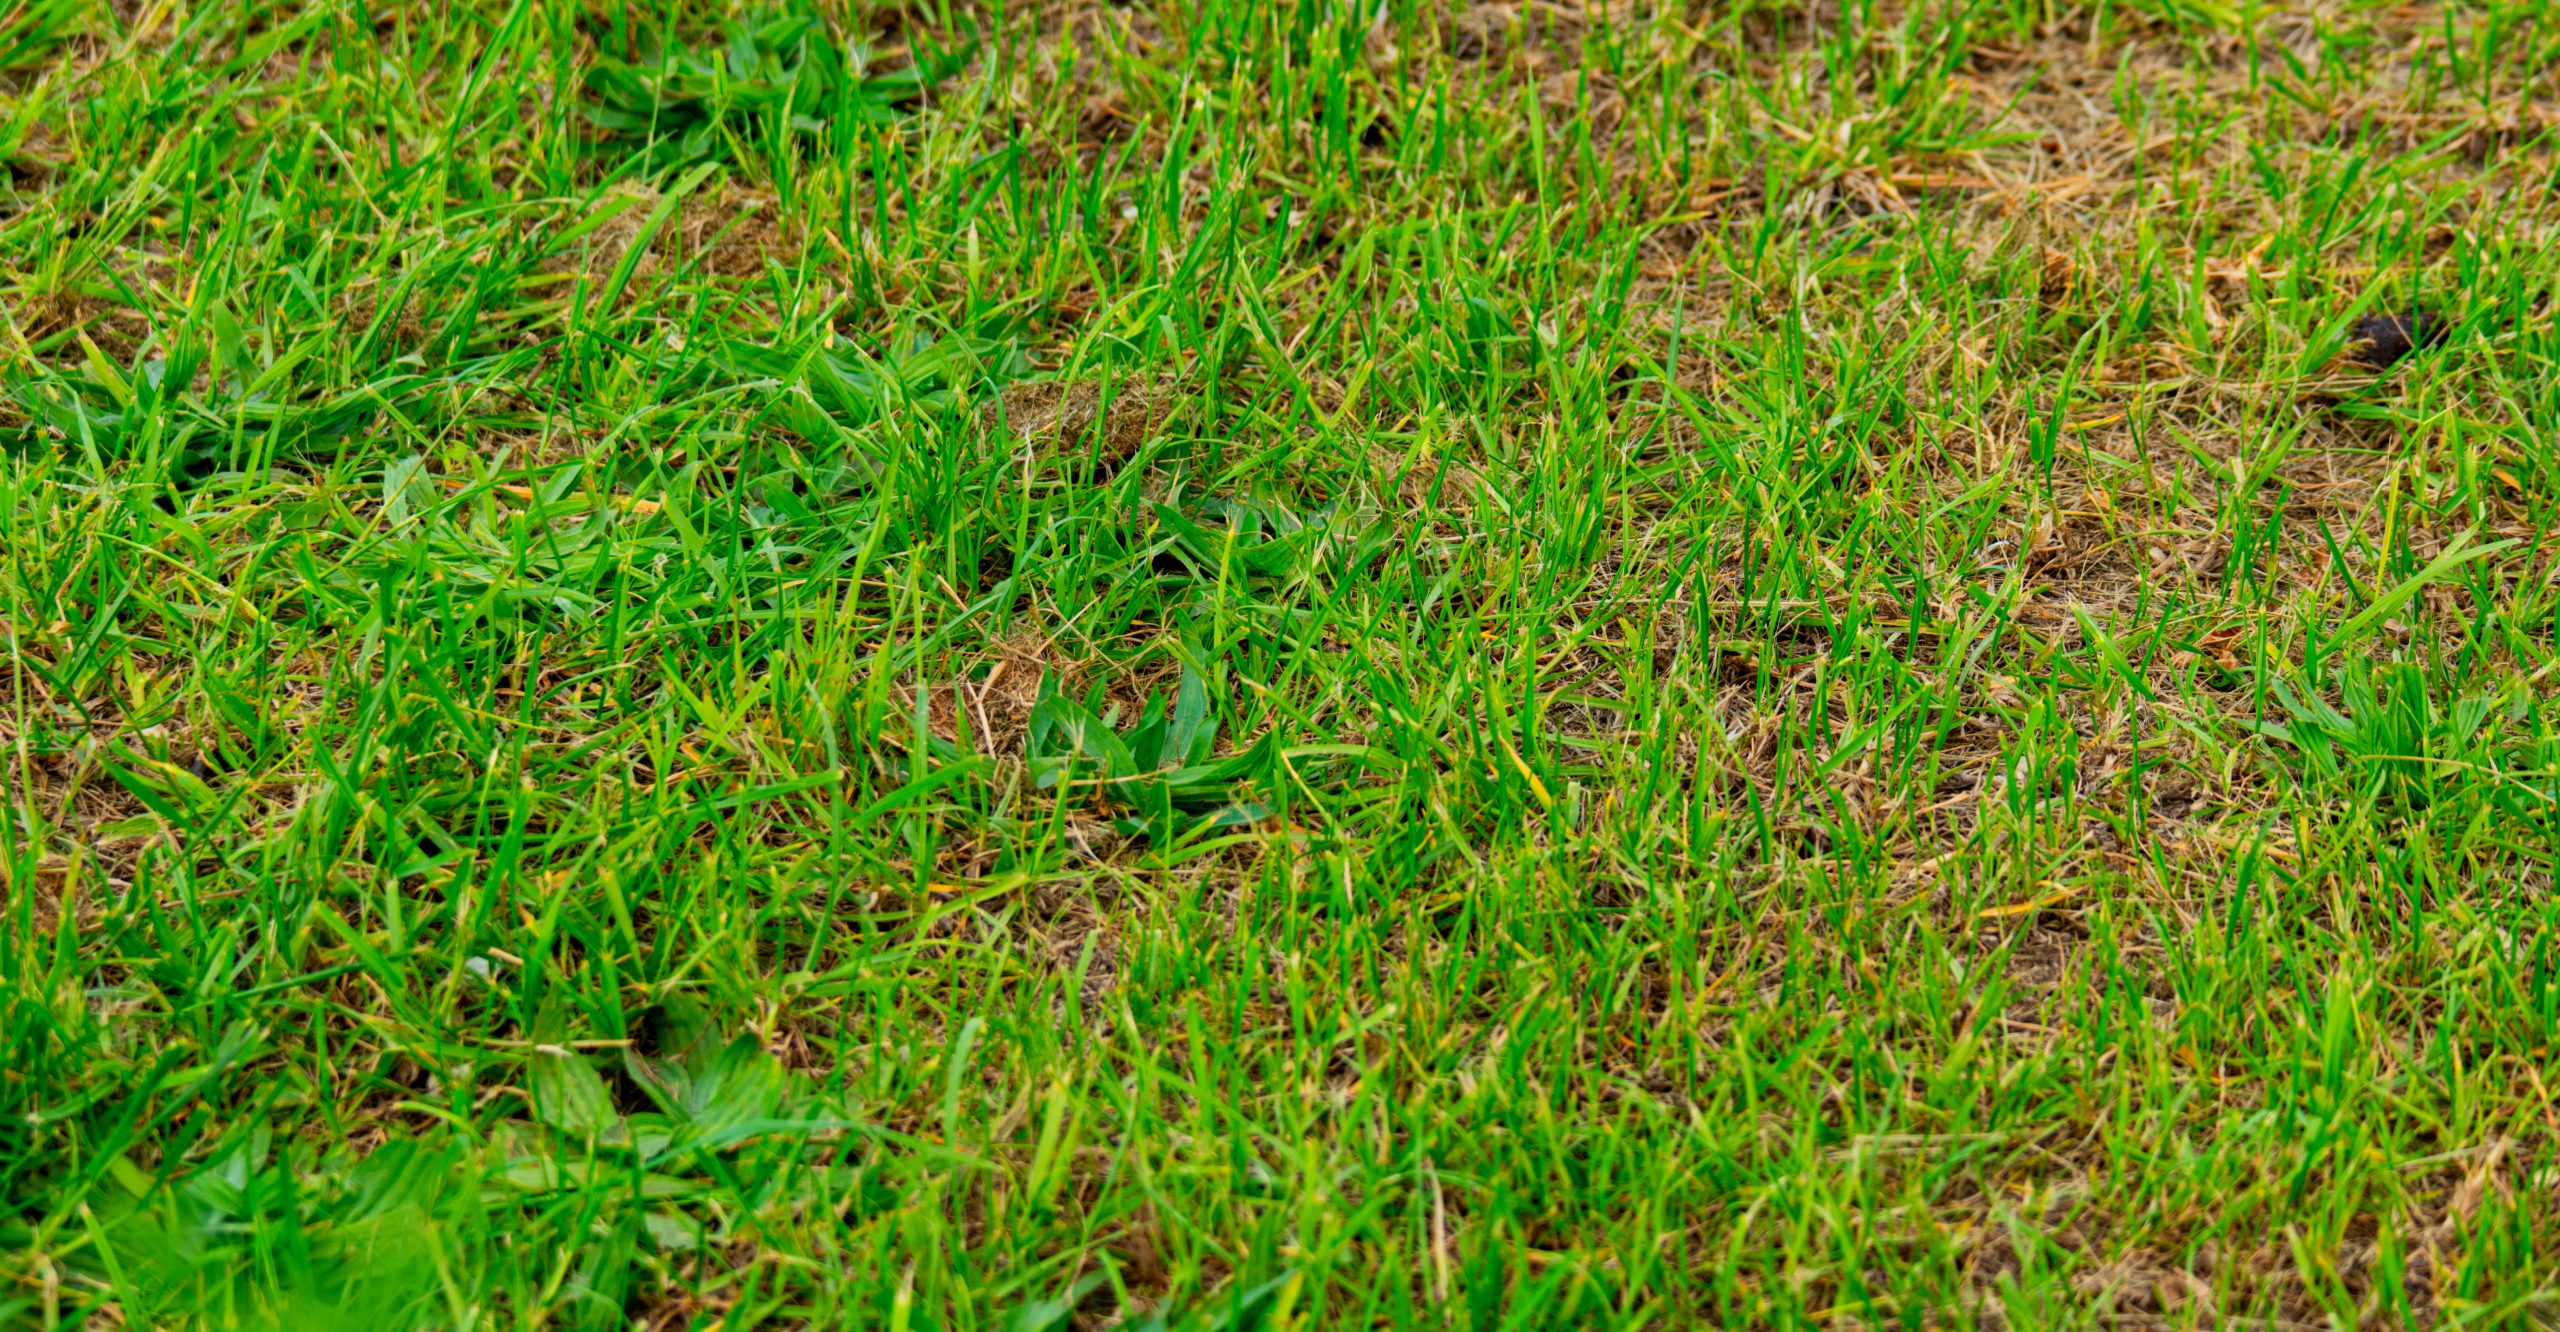 Sparse grass cover of lawn in arid area, water lack